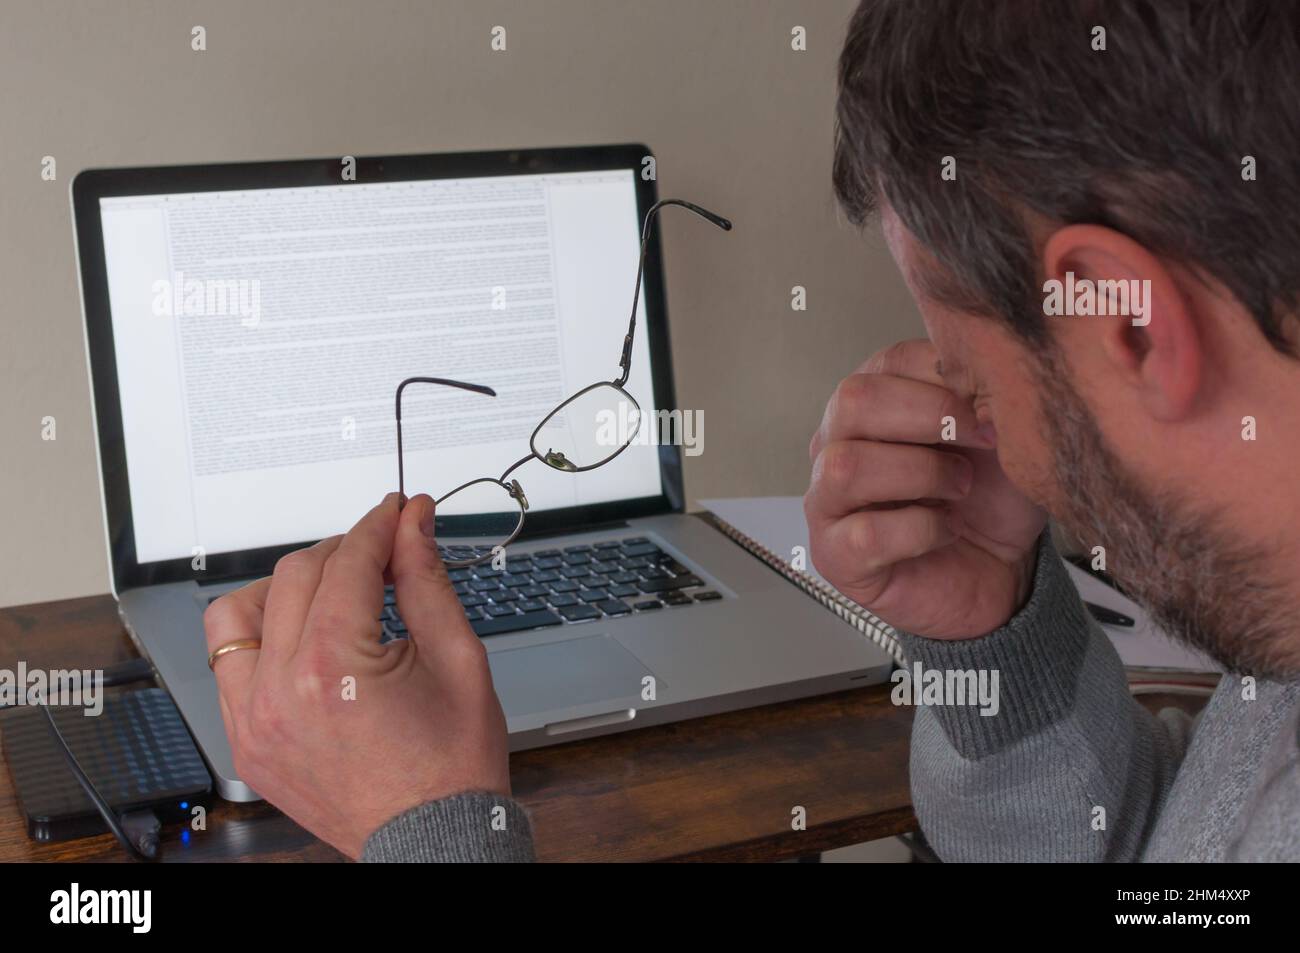 man works on a laptop and takes off his glasses because his eyes are bothering him. Glasses in foreground, laptop in background Stock Photo